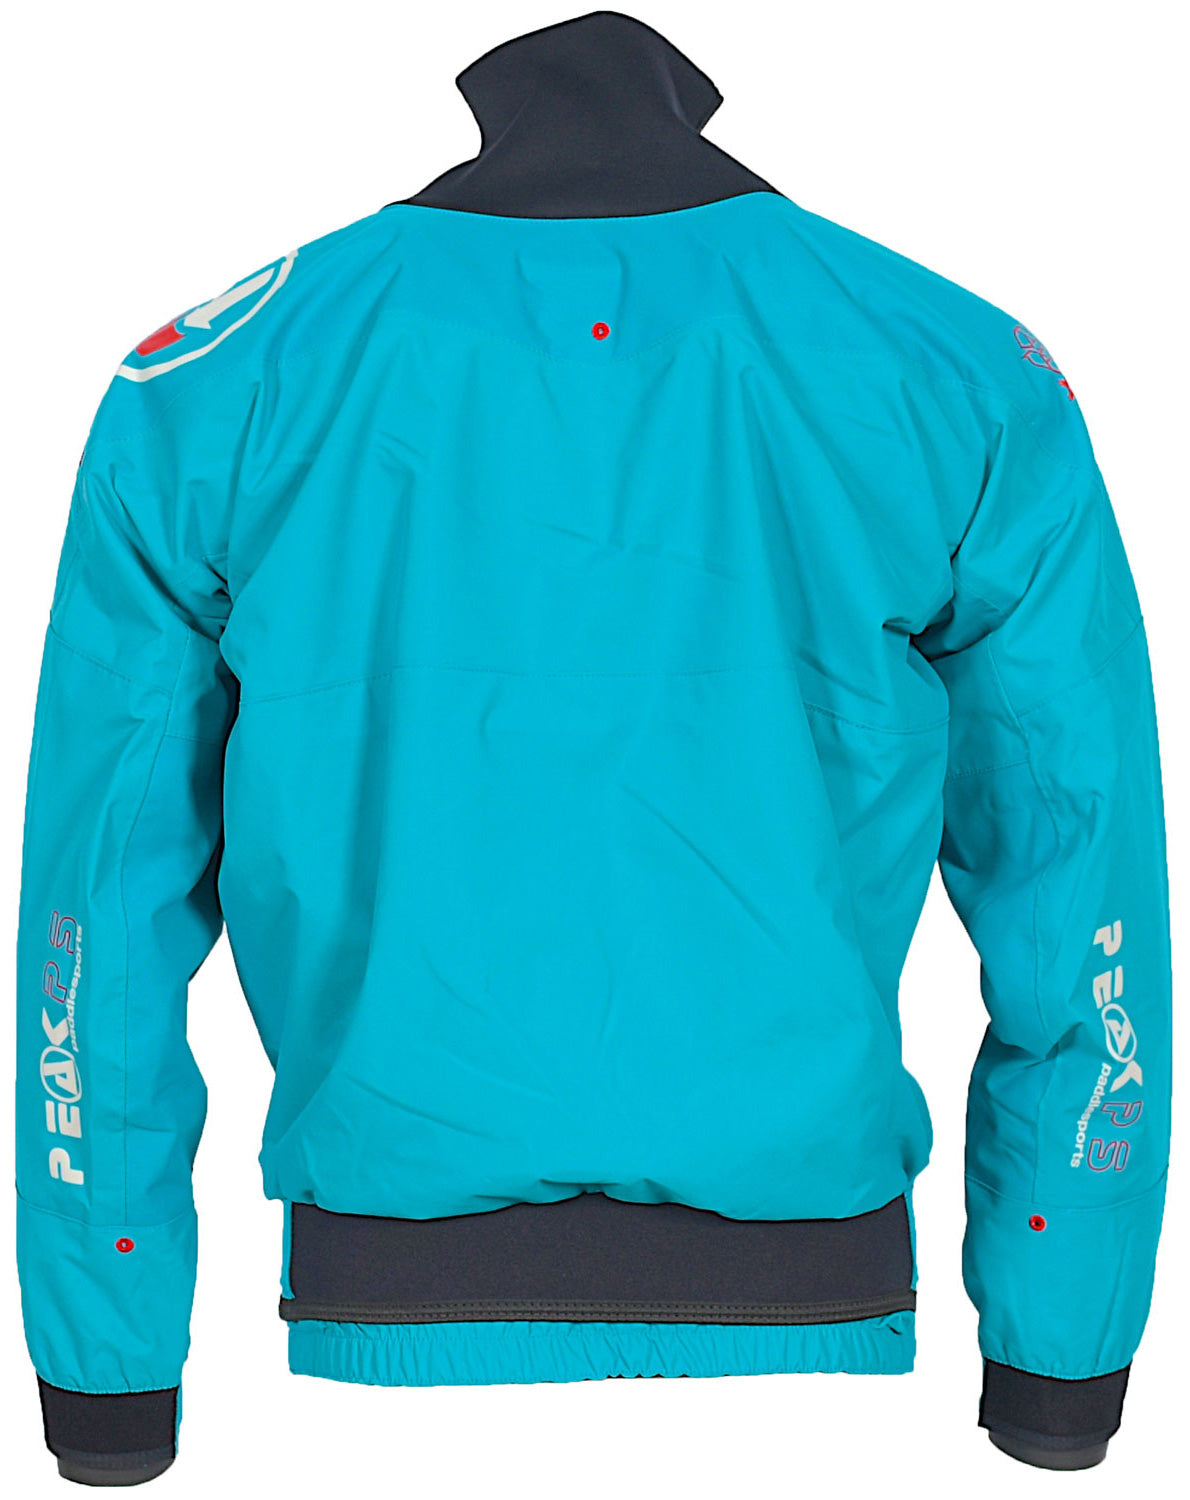 Rear view of the Peak Deluxe 2.5 layer blue whitewater jacket with red detailing